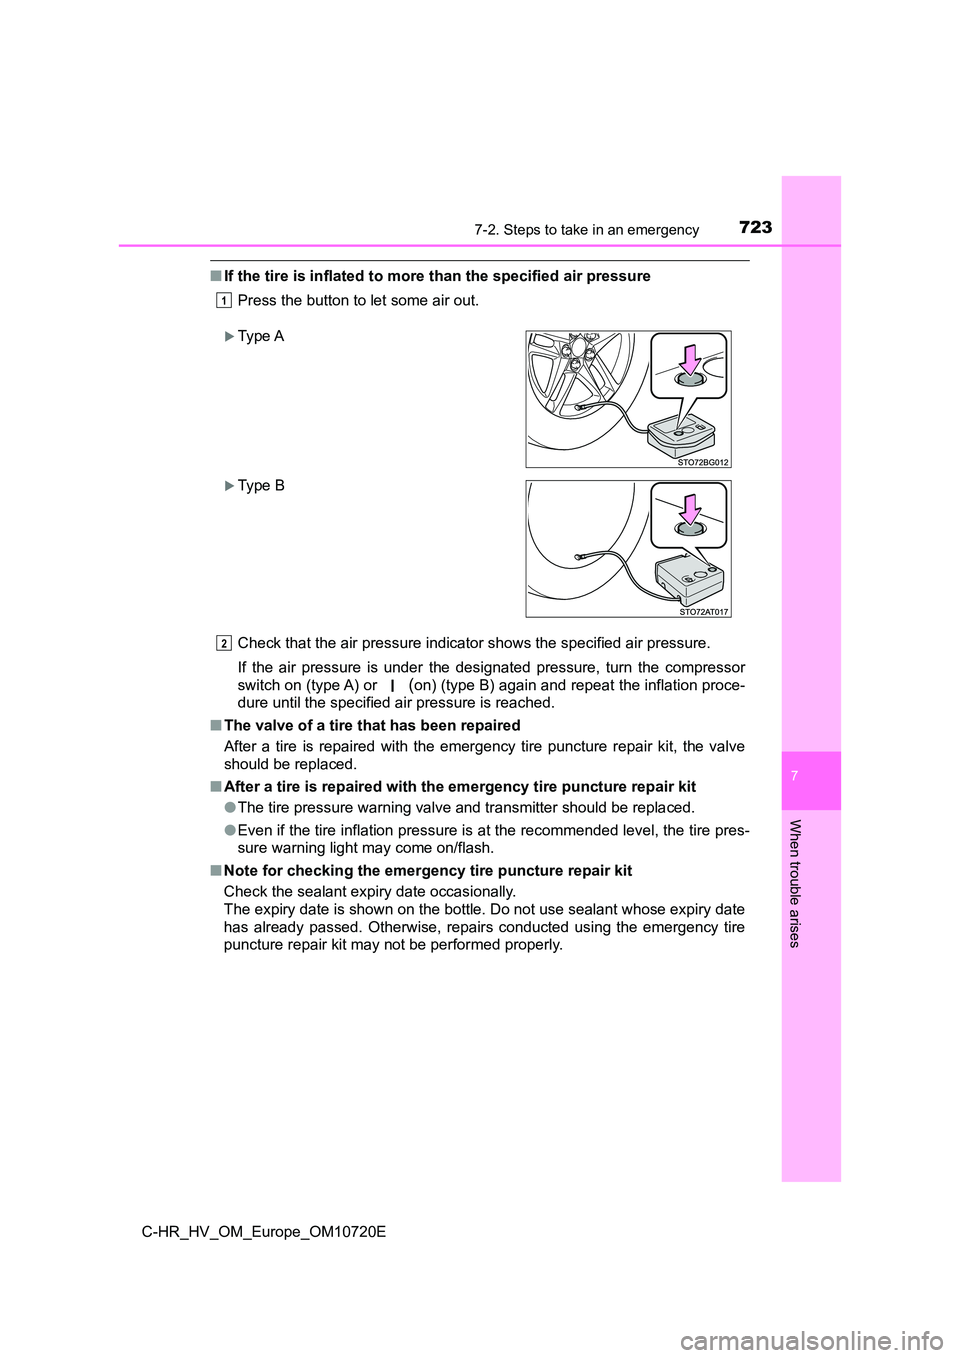 TOYOTA C-HR 2022  Owners Manual 7237-2. Steps to take in an emergency
C-HR_HV_OM_Europe_OM10720E
7
When trouble arises
■If the tire is inflated to more than the specified air pressure 
Press the button to let some air out. 
Check 